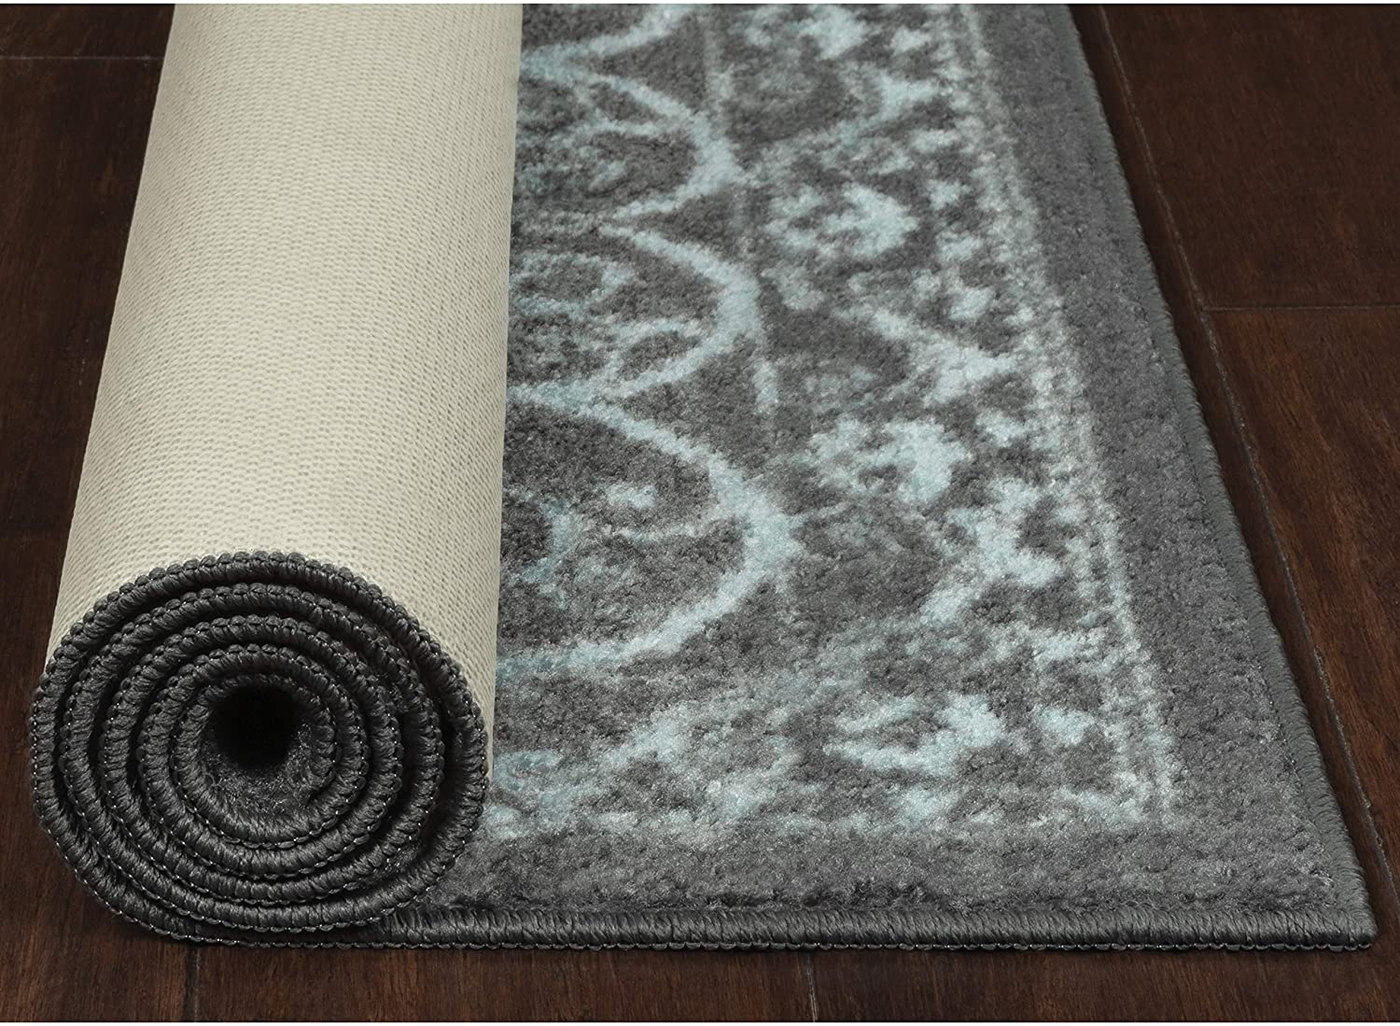 Maples Rugs Pelham Vintage Non Skid 2pc Kitchen Rugs Set [Made in USA] Washable Floor Mat for Under Sink, Entryway, and Laundry, 2pc Set, Grey Tonal